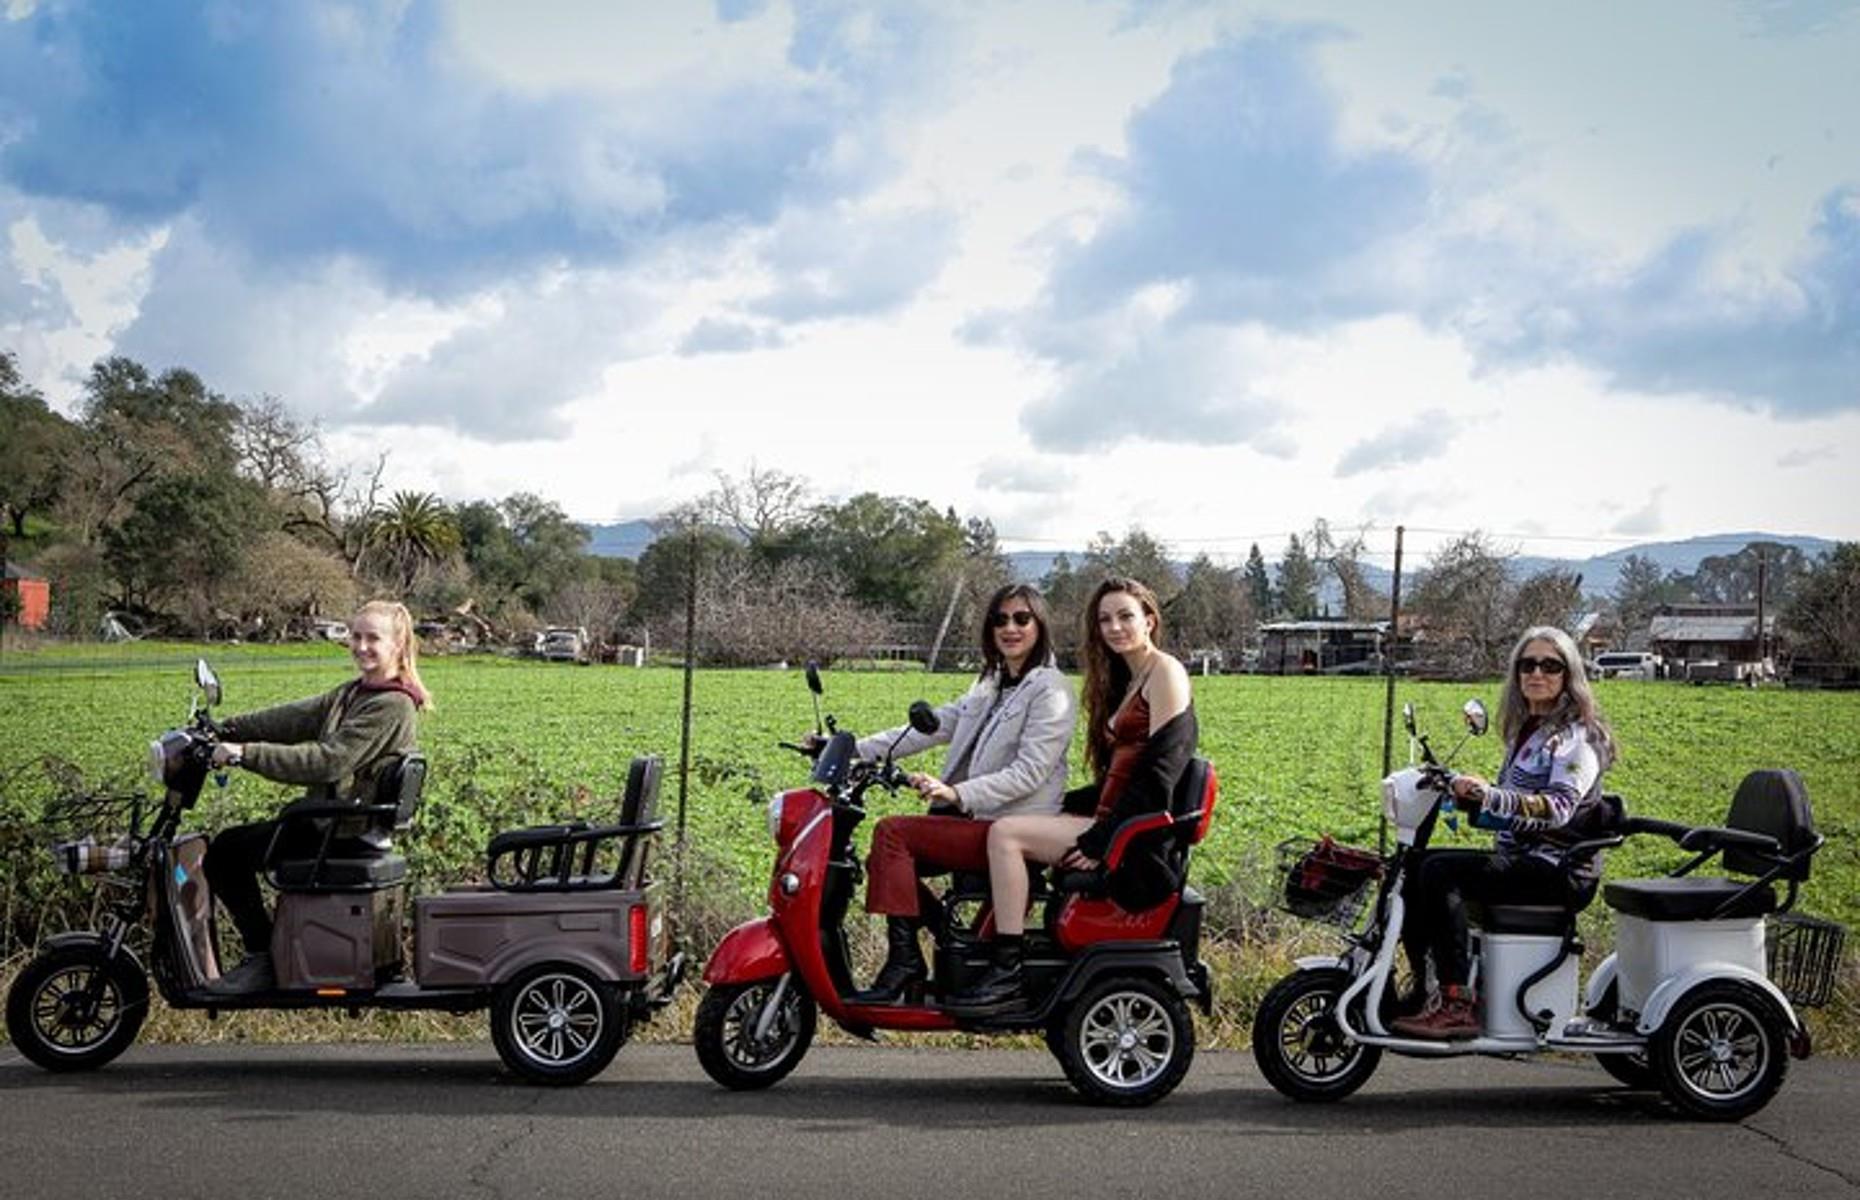 <p>Although they offer something a little different from the conventional e-biking experience, the e-trikes provided by <a href="https://www.pushpakmotors.net/">Pushpak Motors</a> are a fun and environmentally friendly way to explore California’s wine country. With space for two riders apiece, these three-wheeled electric trikes will whizz you past scenic vineyards in no time – with plenty of stops along the way.</p>  <p><a href="https://www.loveexploring.com/galleries/141218/americas-best-destinations-for-wine-lovers"><strong>Check out America's best destinations for wine lovers</strong></a></p>